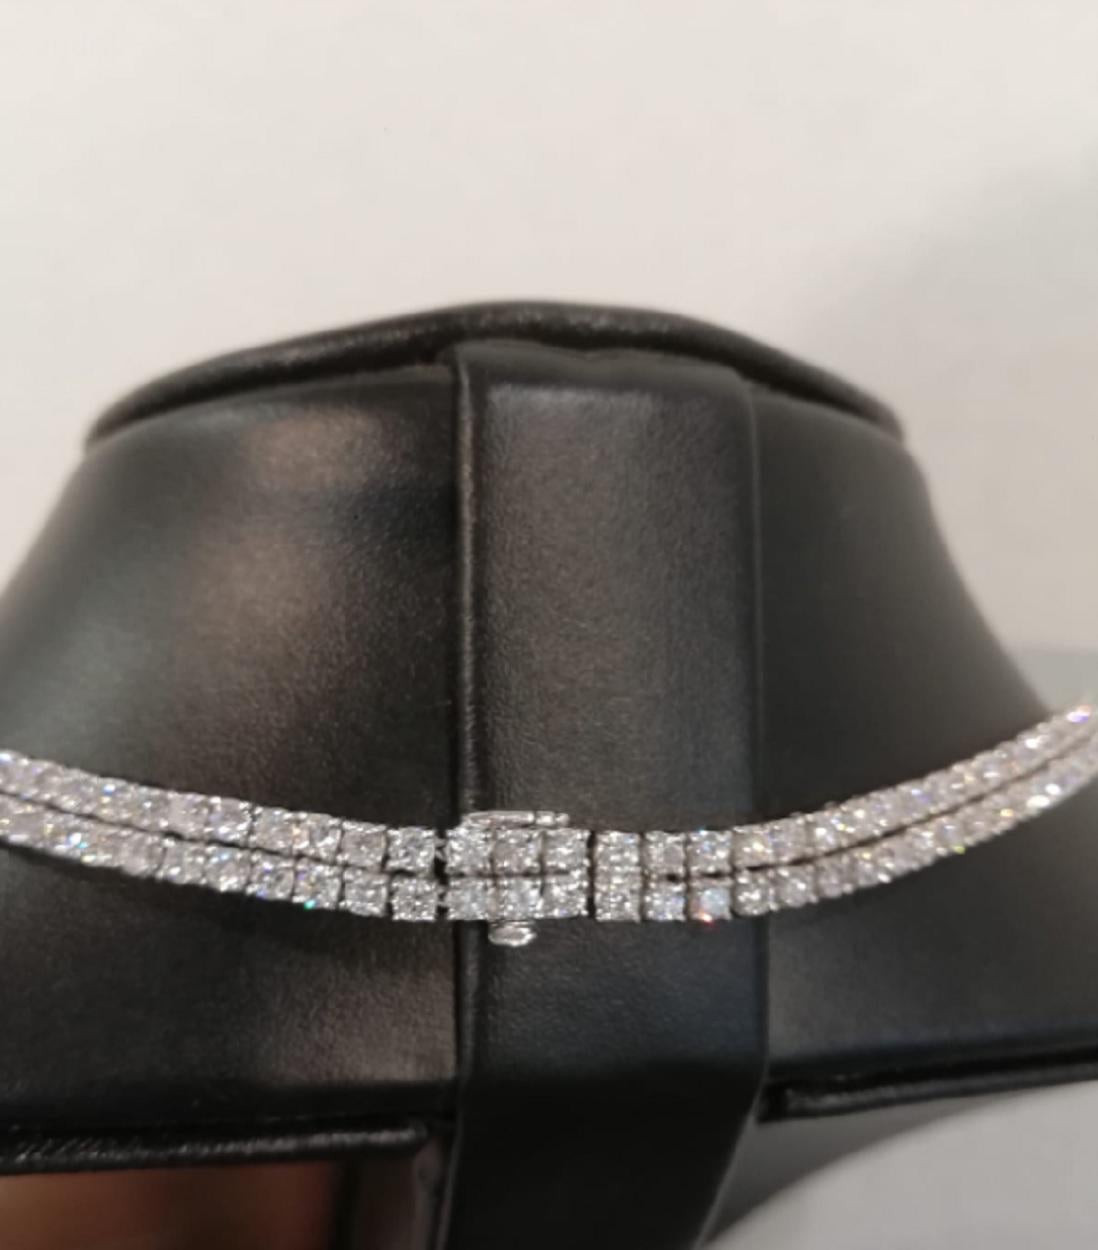 Heirloom necklace! the best Christmas present for a lady

a magnificent made in Italy 38 carats double tennis necklace with a very nice and modern designed brooch with baguette diamonds.

All diamonds are VS/VVS clarity color is F/G

natural